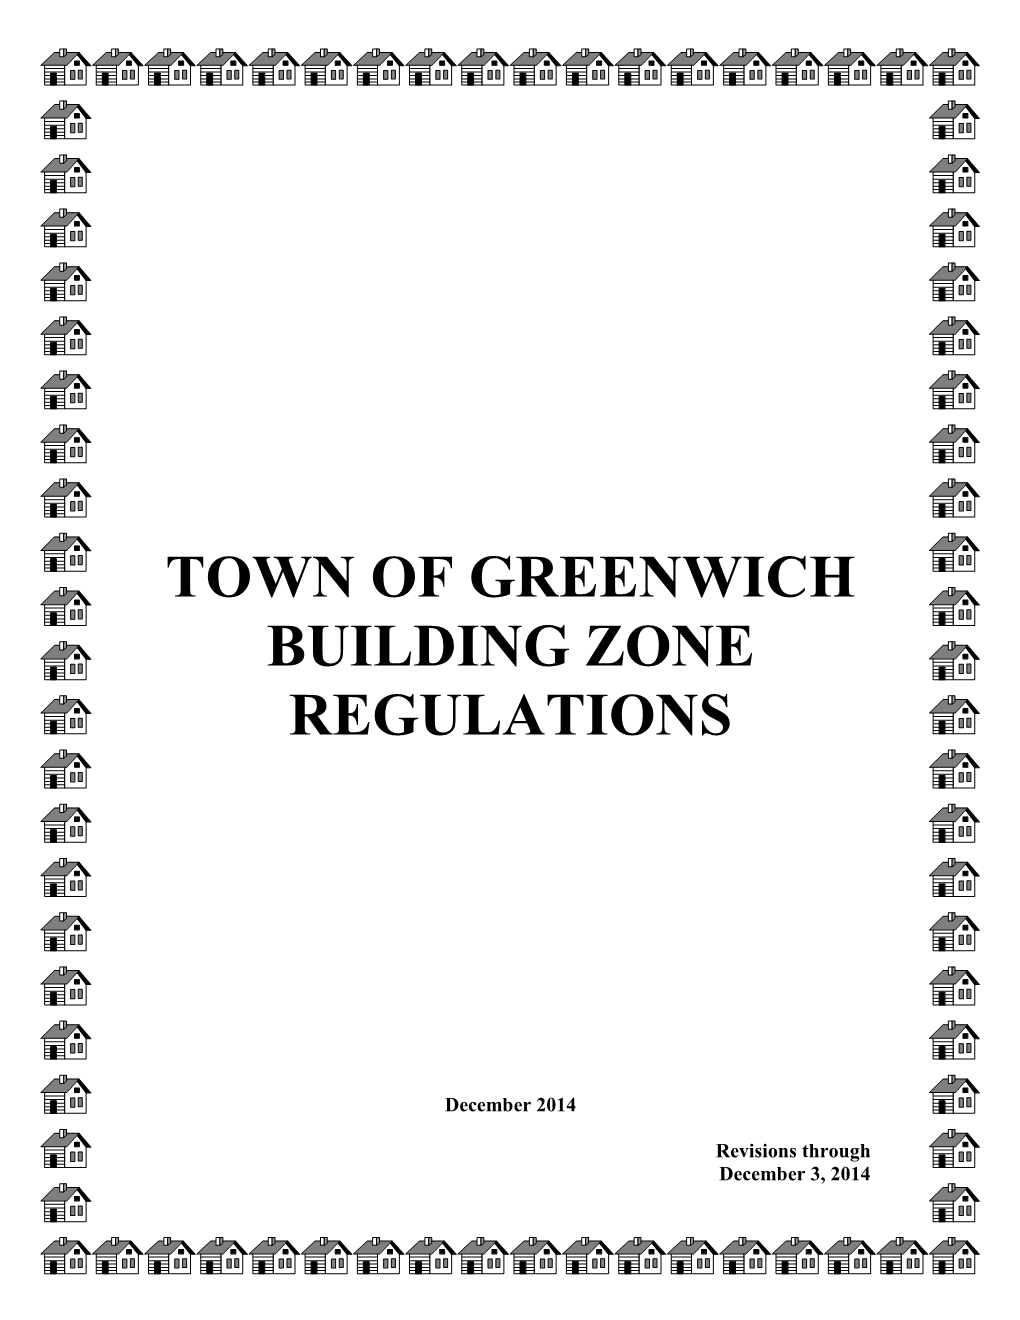 Town of Greenwich Building Zone Regulations